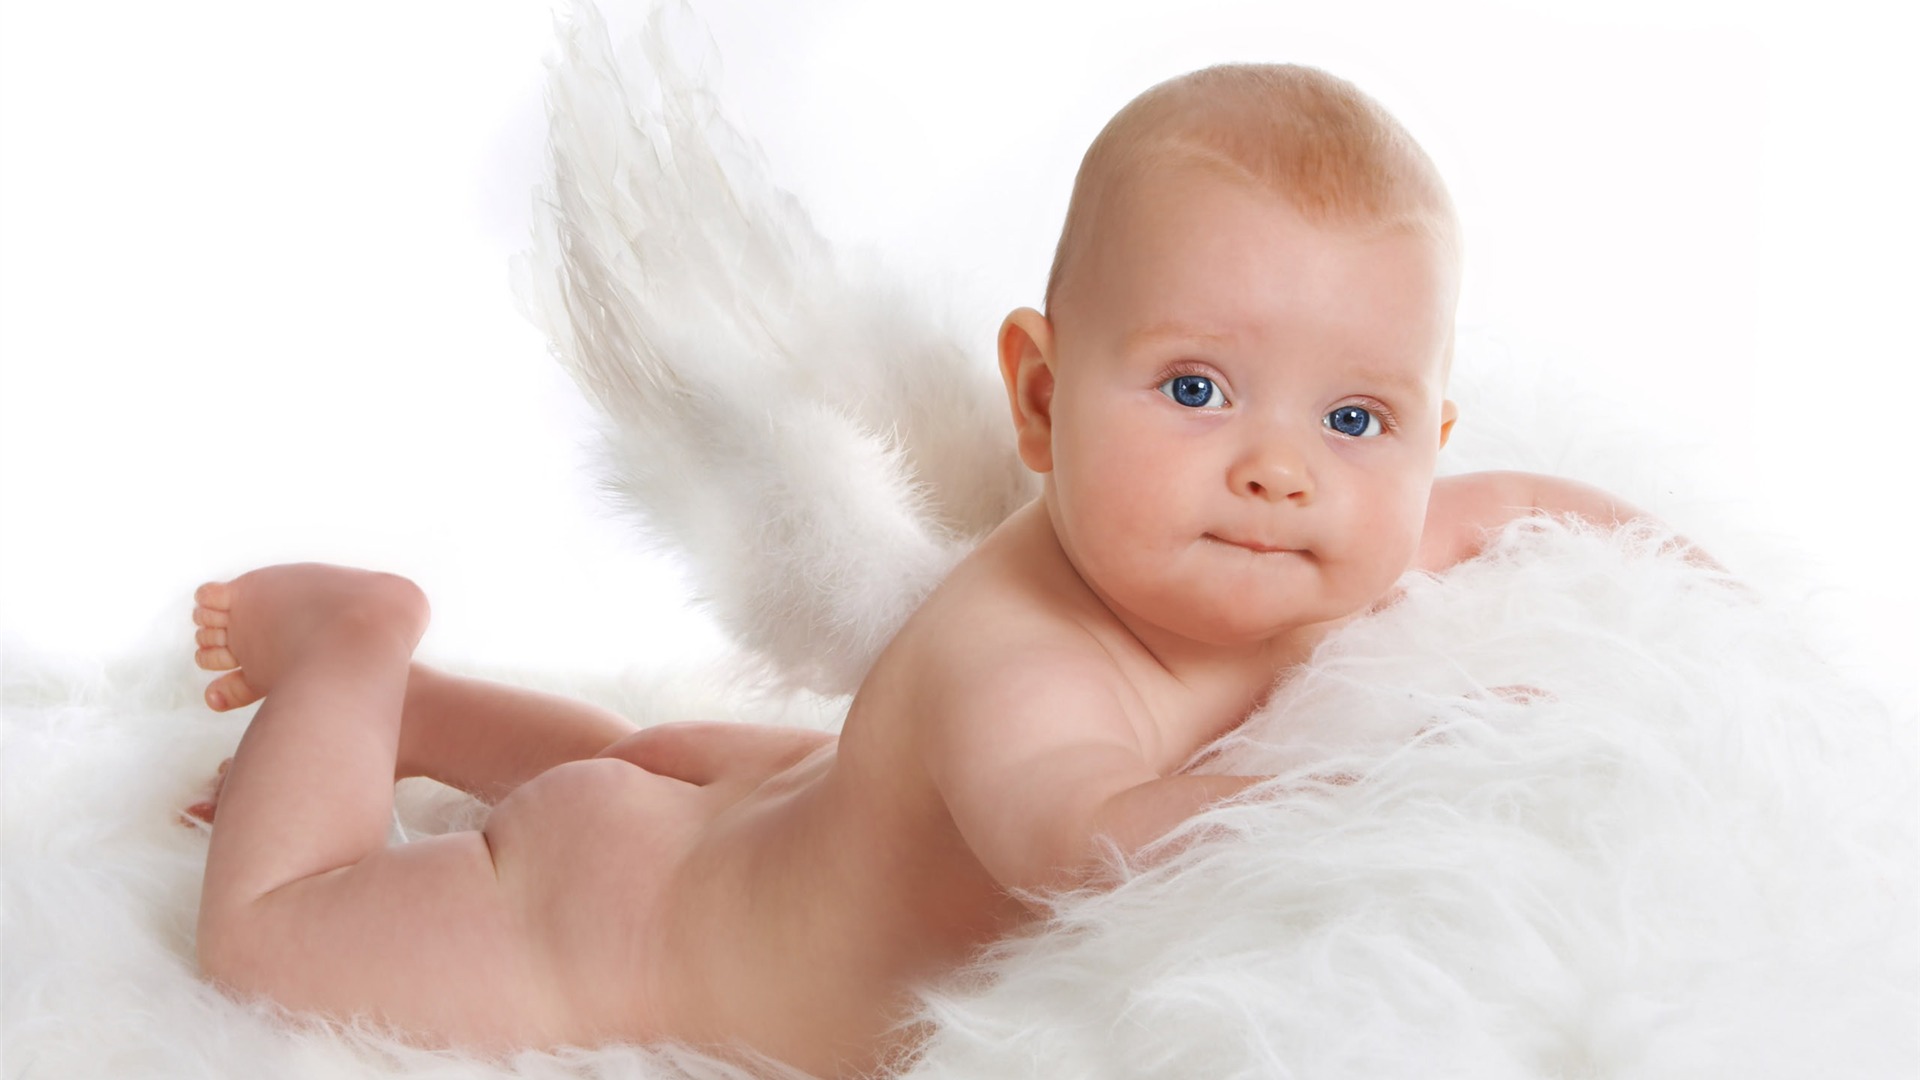 Cute Baby Wallpapers (6) #20 - 1920x1080